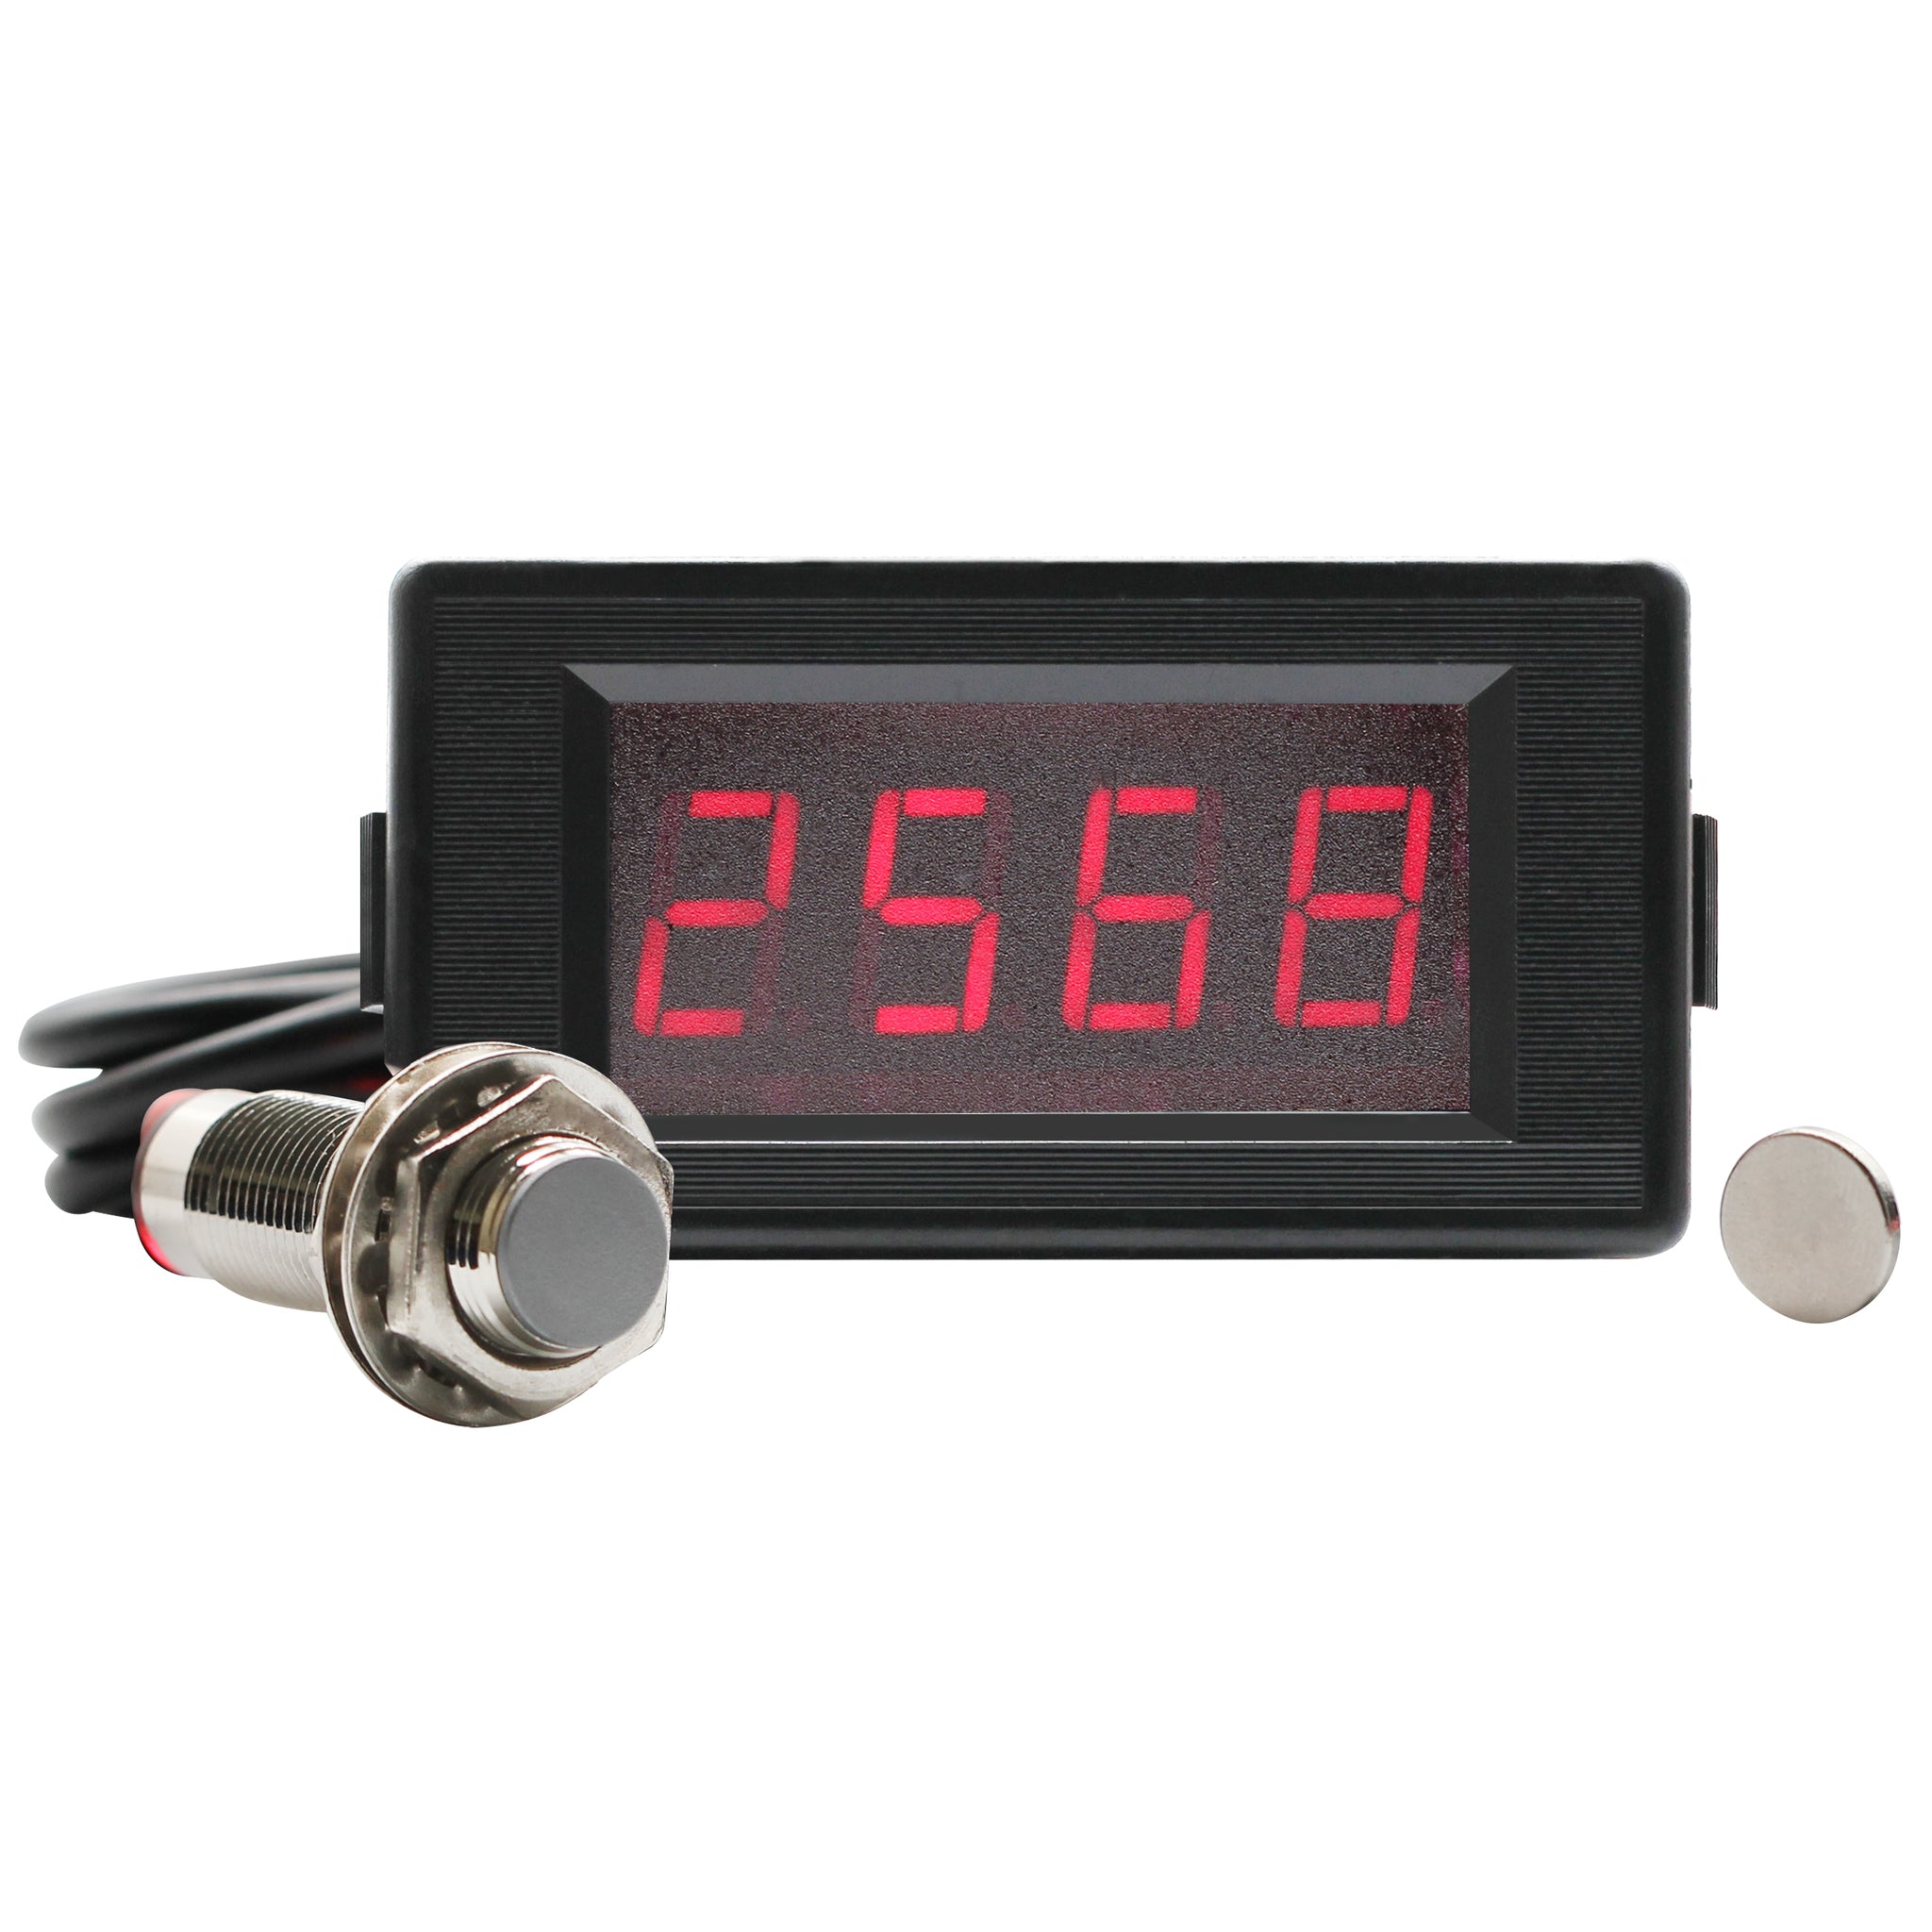 Mantle rulle maternal DIGITEN DC 12V 4 Digital Red LED Counter Meter Up Down+Hall Proximity